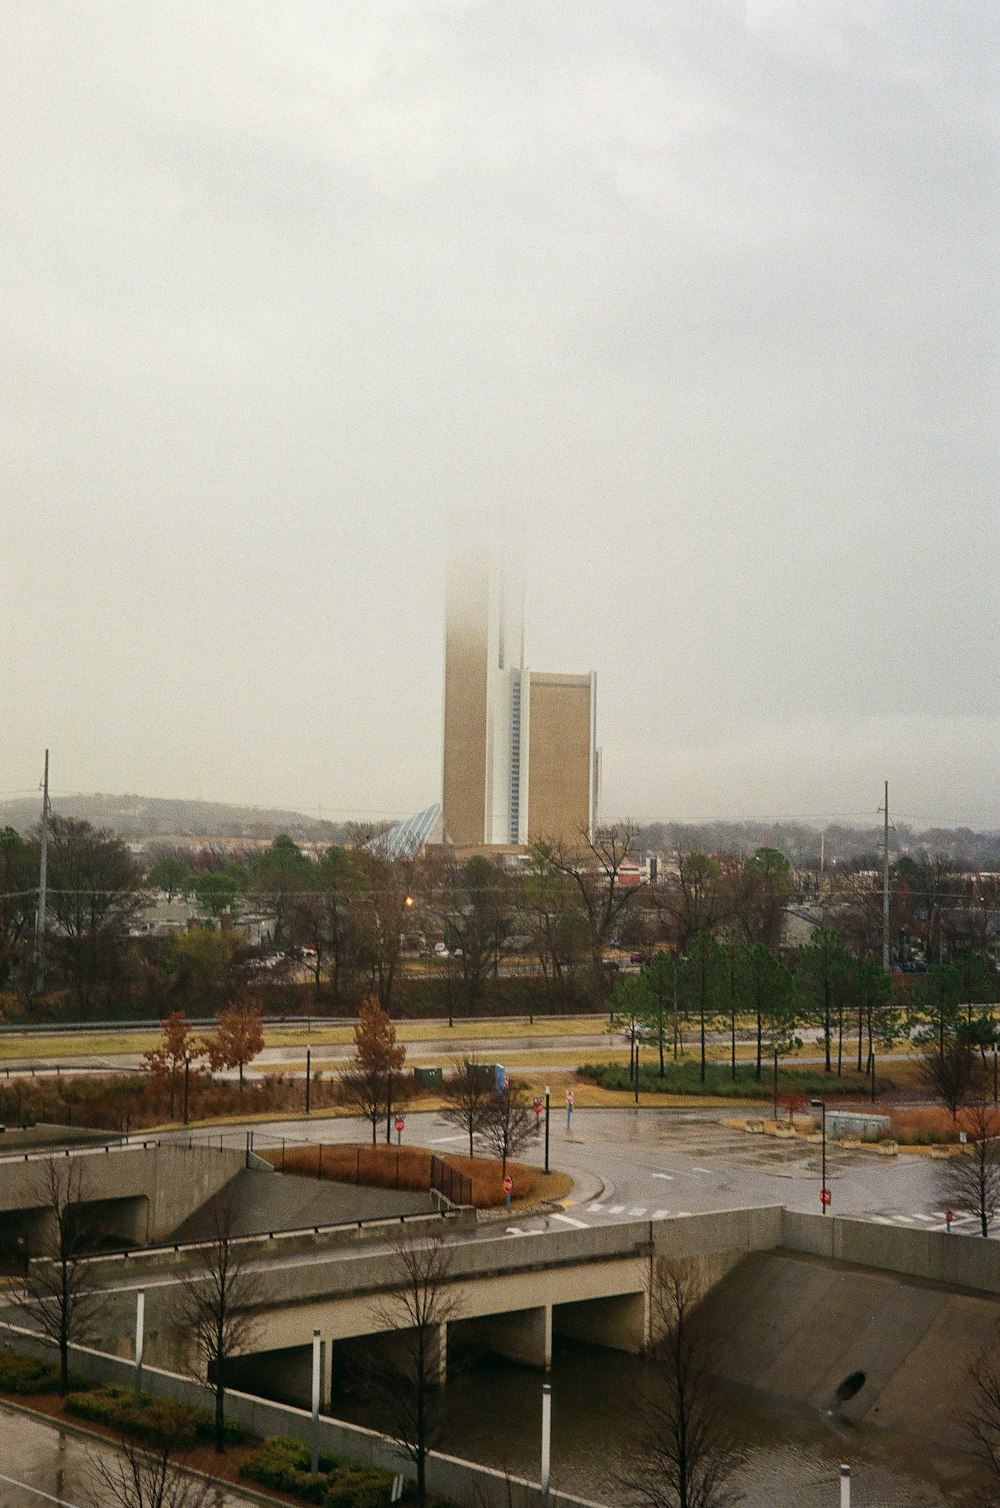 a view of a parking lot with a building in the background